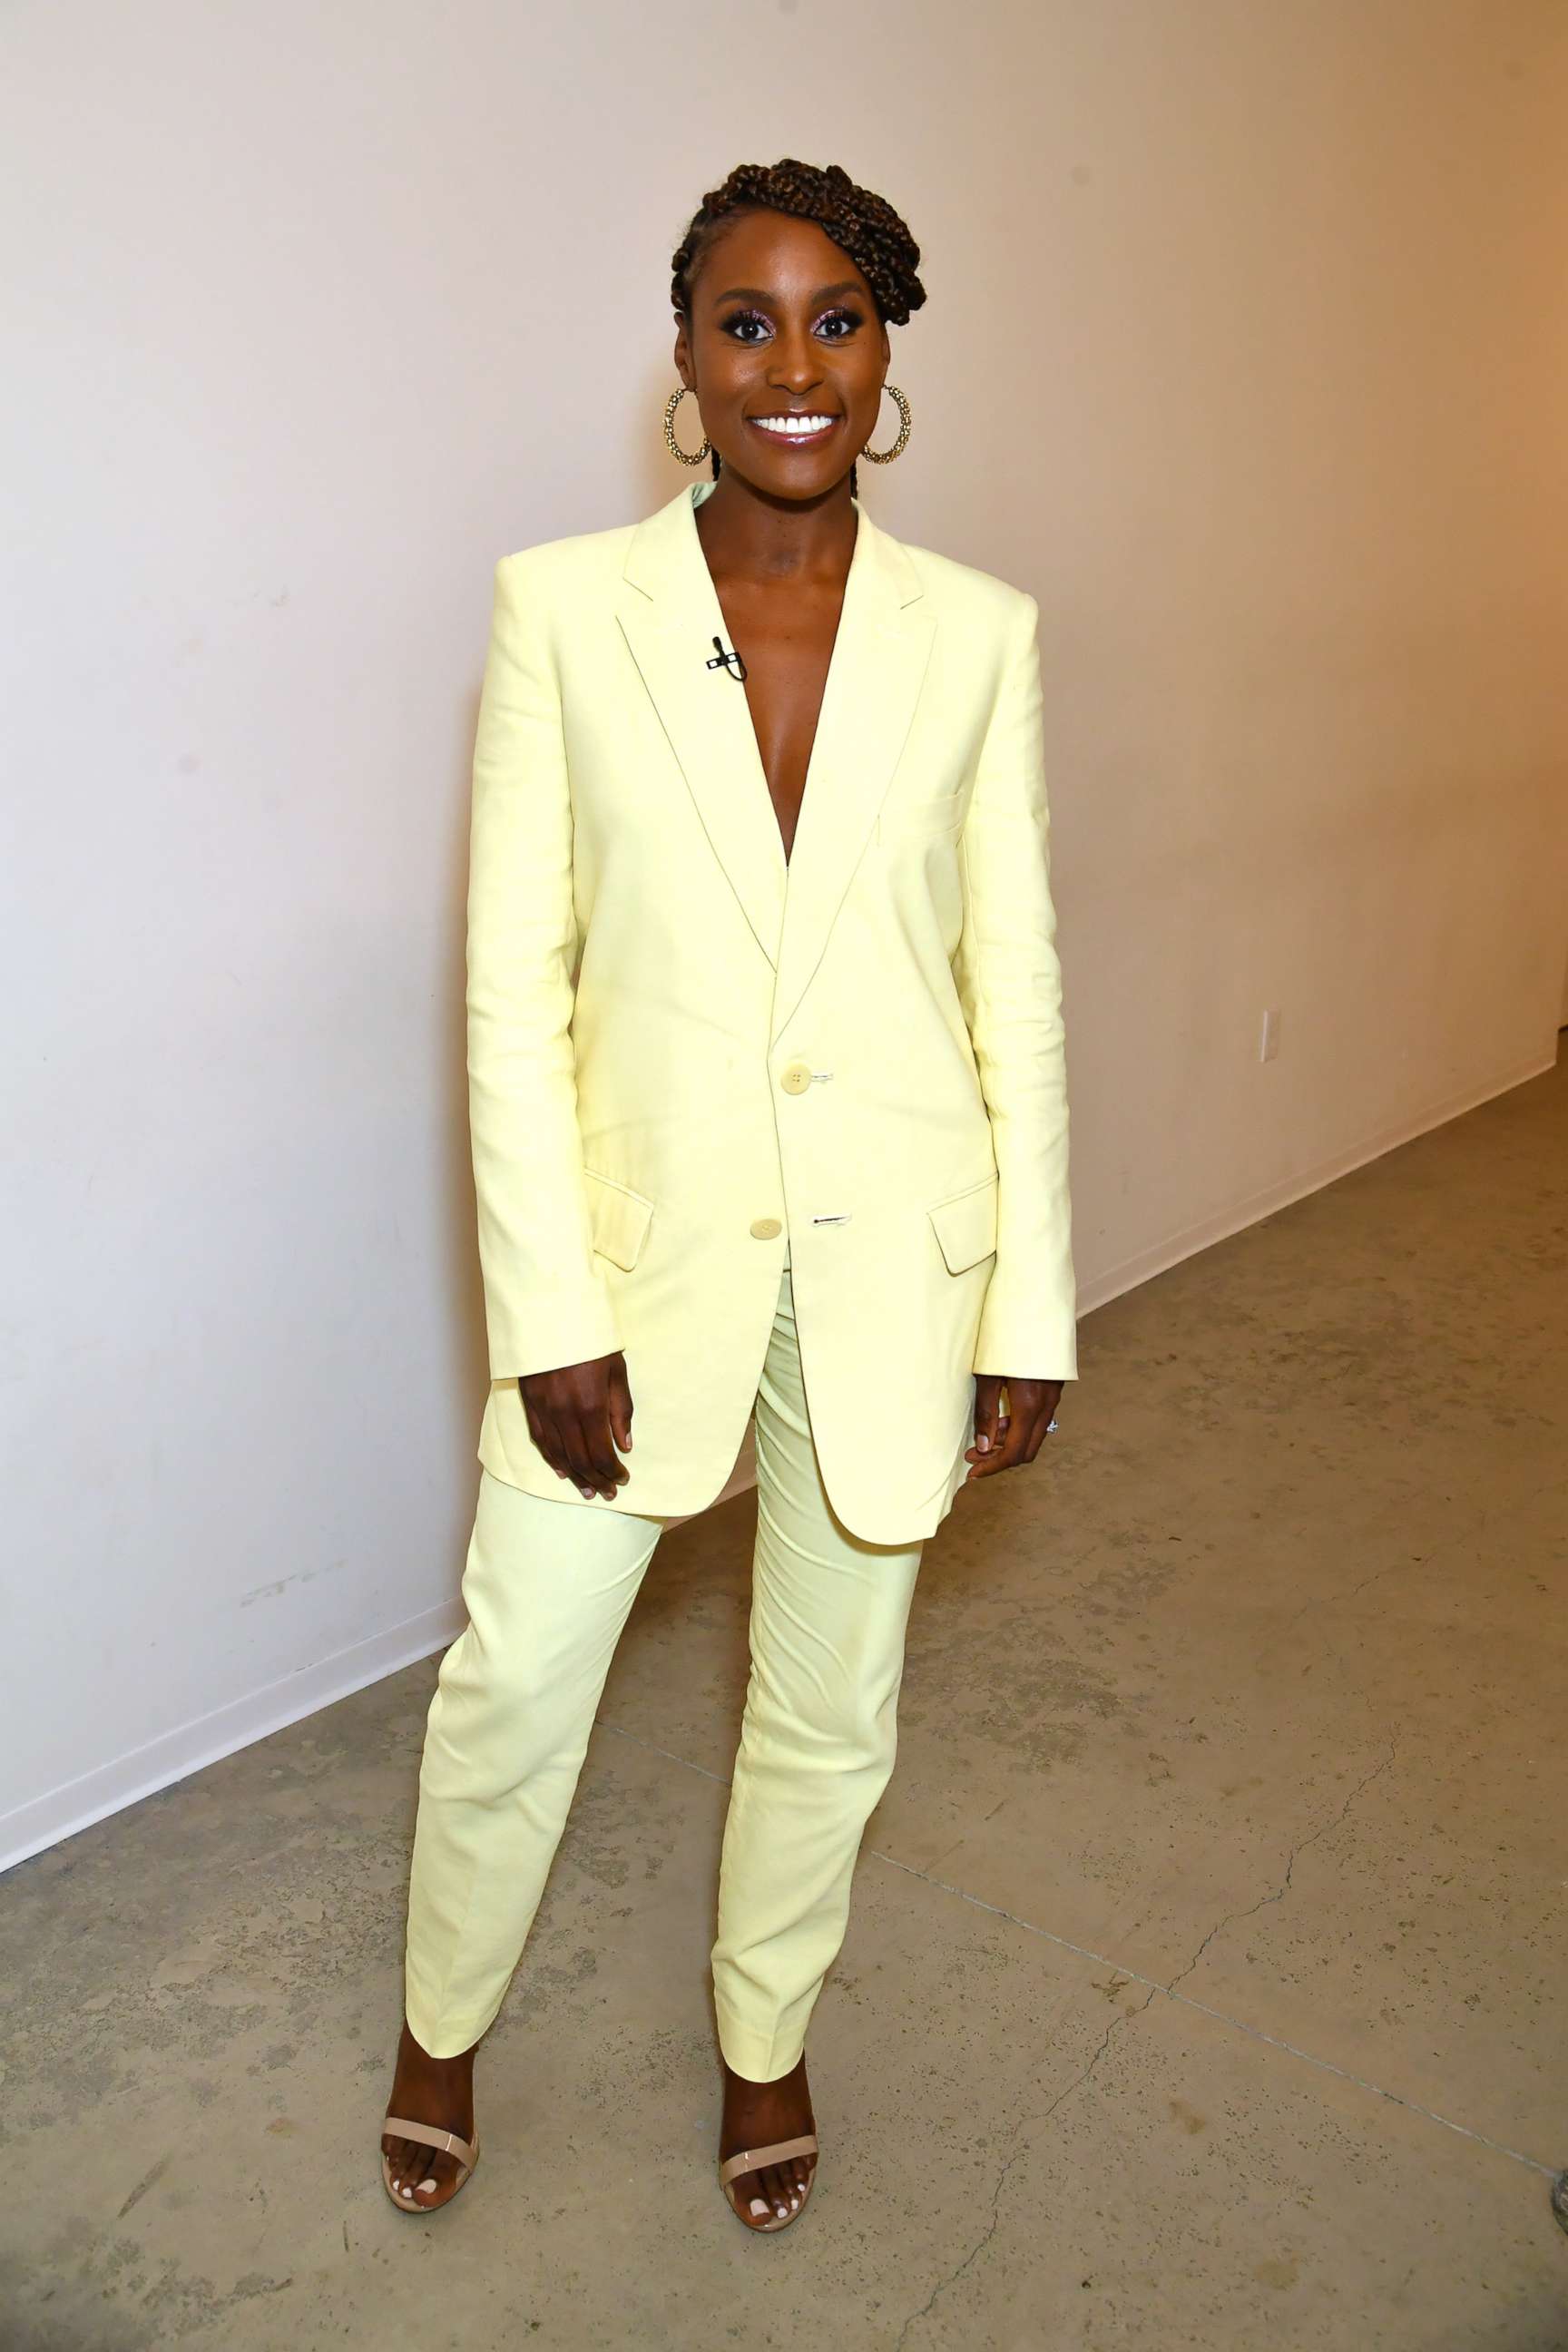 PHOTO: Issa Rae poses for photos at the Wolf Theater at Saban Media Center Television Academy on May 28, 2019, in Los Angeles.